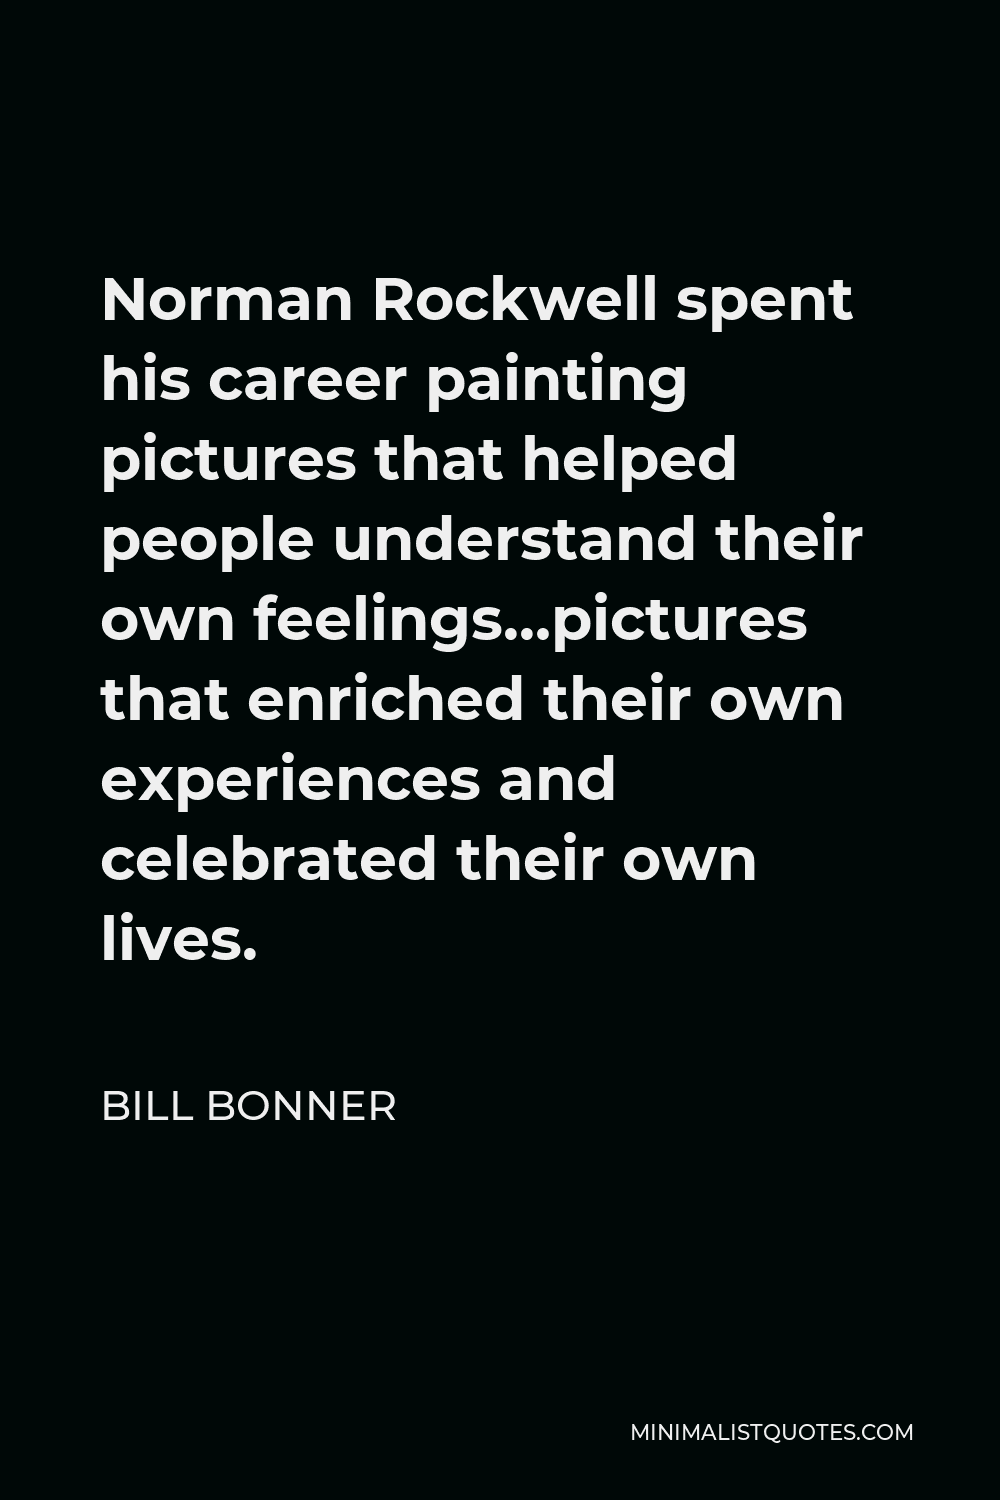 Bill Bonner Quote - Norman Rockwell spent his career painting pictures that helped people understand their own feelings…pictures that enriched their own experiences and celebrated their own lives.